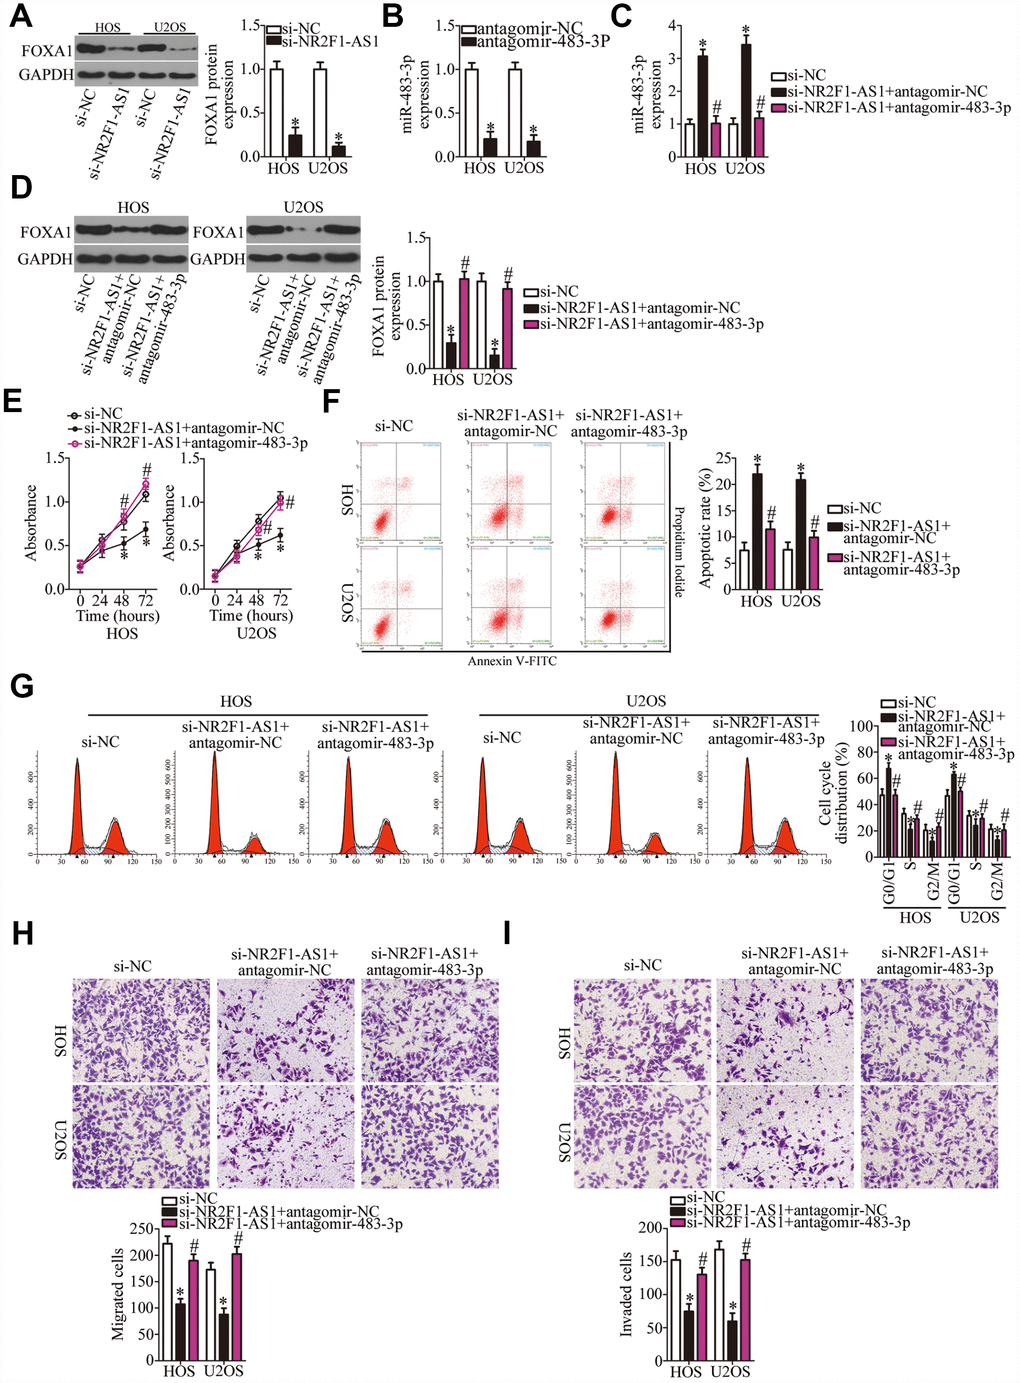 Inhibition of miR-483-3p weakens the effects of NR2F1-AS1 knockdown in OS cells. (A) Western blotting analysis of FOXA1 expression in NR2F1-AS1–deficient HOS and U2OS cells. *P B) HOS and U2OS cells were transfected with either antagomir-483-3p or antagomir-NC. After 48 h of transfection, total RNA was isolated from the cells and used for quantitation of miR-483-3p. *P C, D) Si-NR2F1-AS1 along with either antagomir-483-3p or antagomir-NC was introduced into HOS and U2OS cells. The expression levels of miR-483-3p and of the FOXA1 protein in the transfected cells were respectively measured by RT-qPCR and western blotting. *P #P E–I) The proliferation, apoptotic rate, cell cycle distribution, migration, and invasiveness of the aforementioned cells were determined by the CCK-8 assay, flow cytometry, and transwell migration and invasion assays, respectively. The decrease in cell proliferation, increase in apoptosis, cell cycle arrest, and inhibition of cell migration and invasion were partially reversed by miR-483-3p knockdown. *P #P 